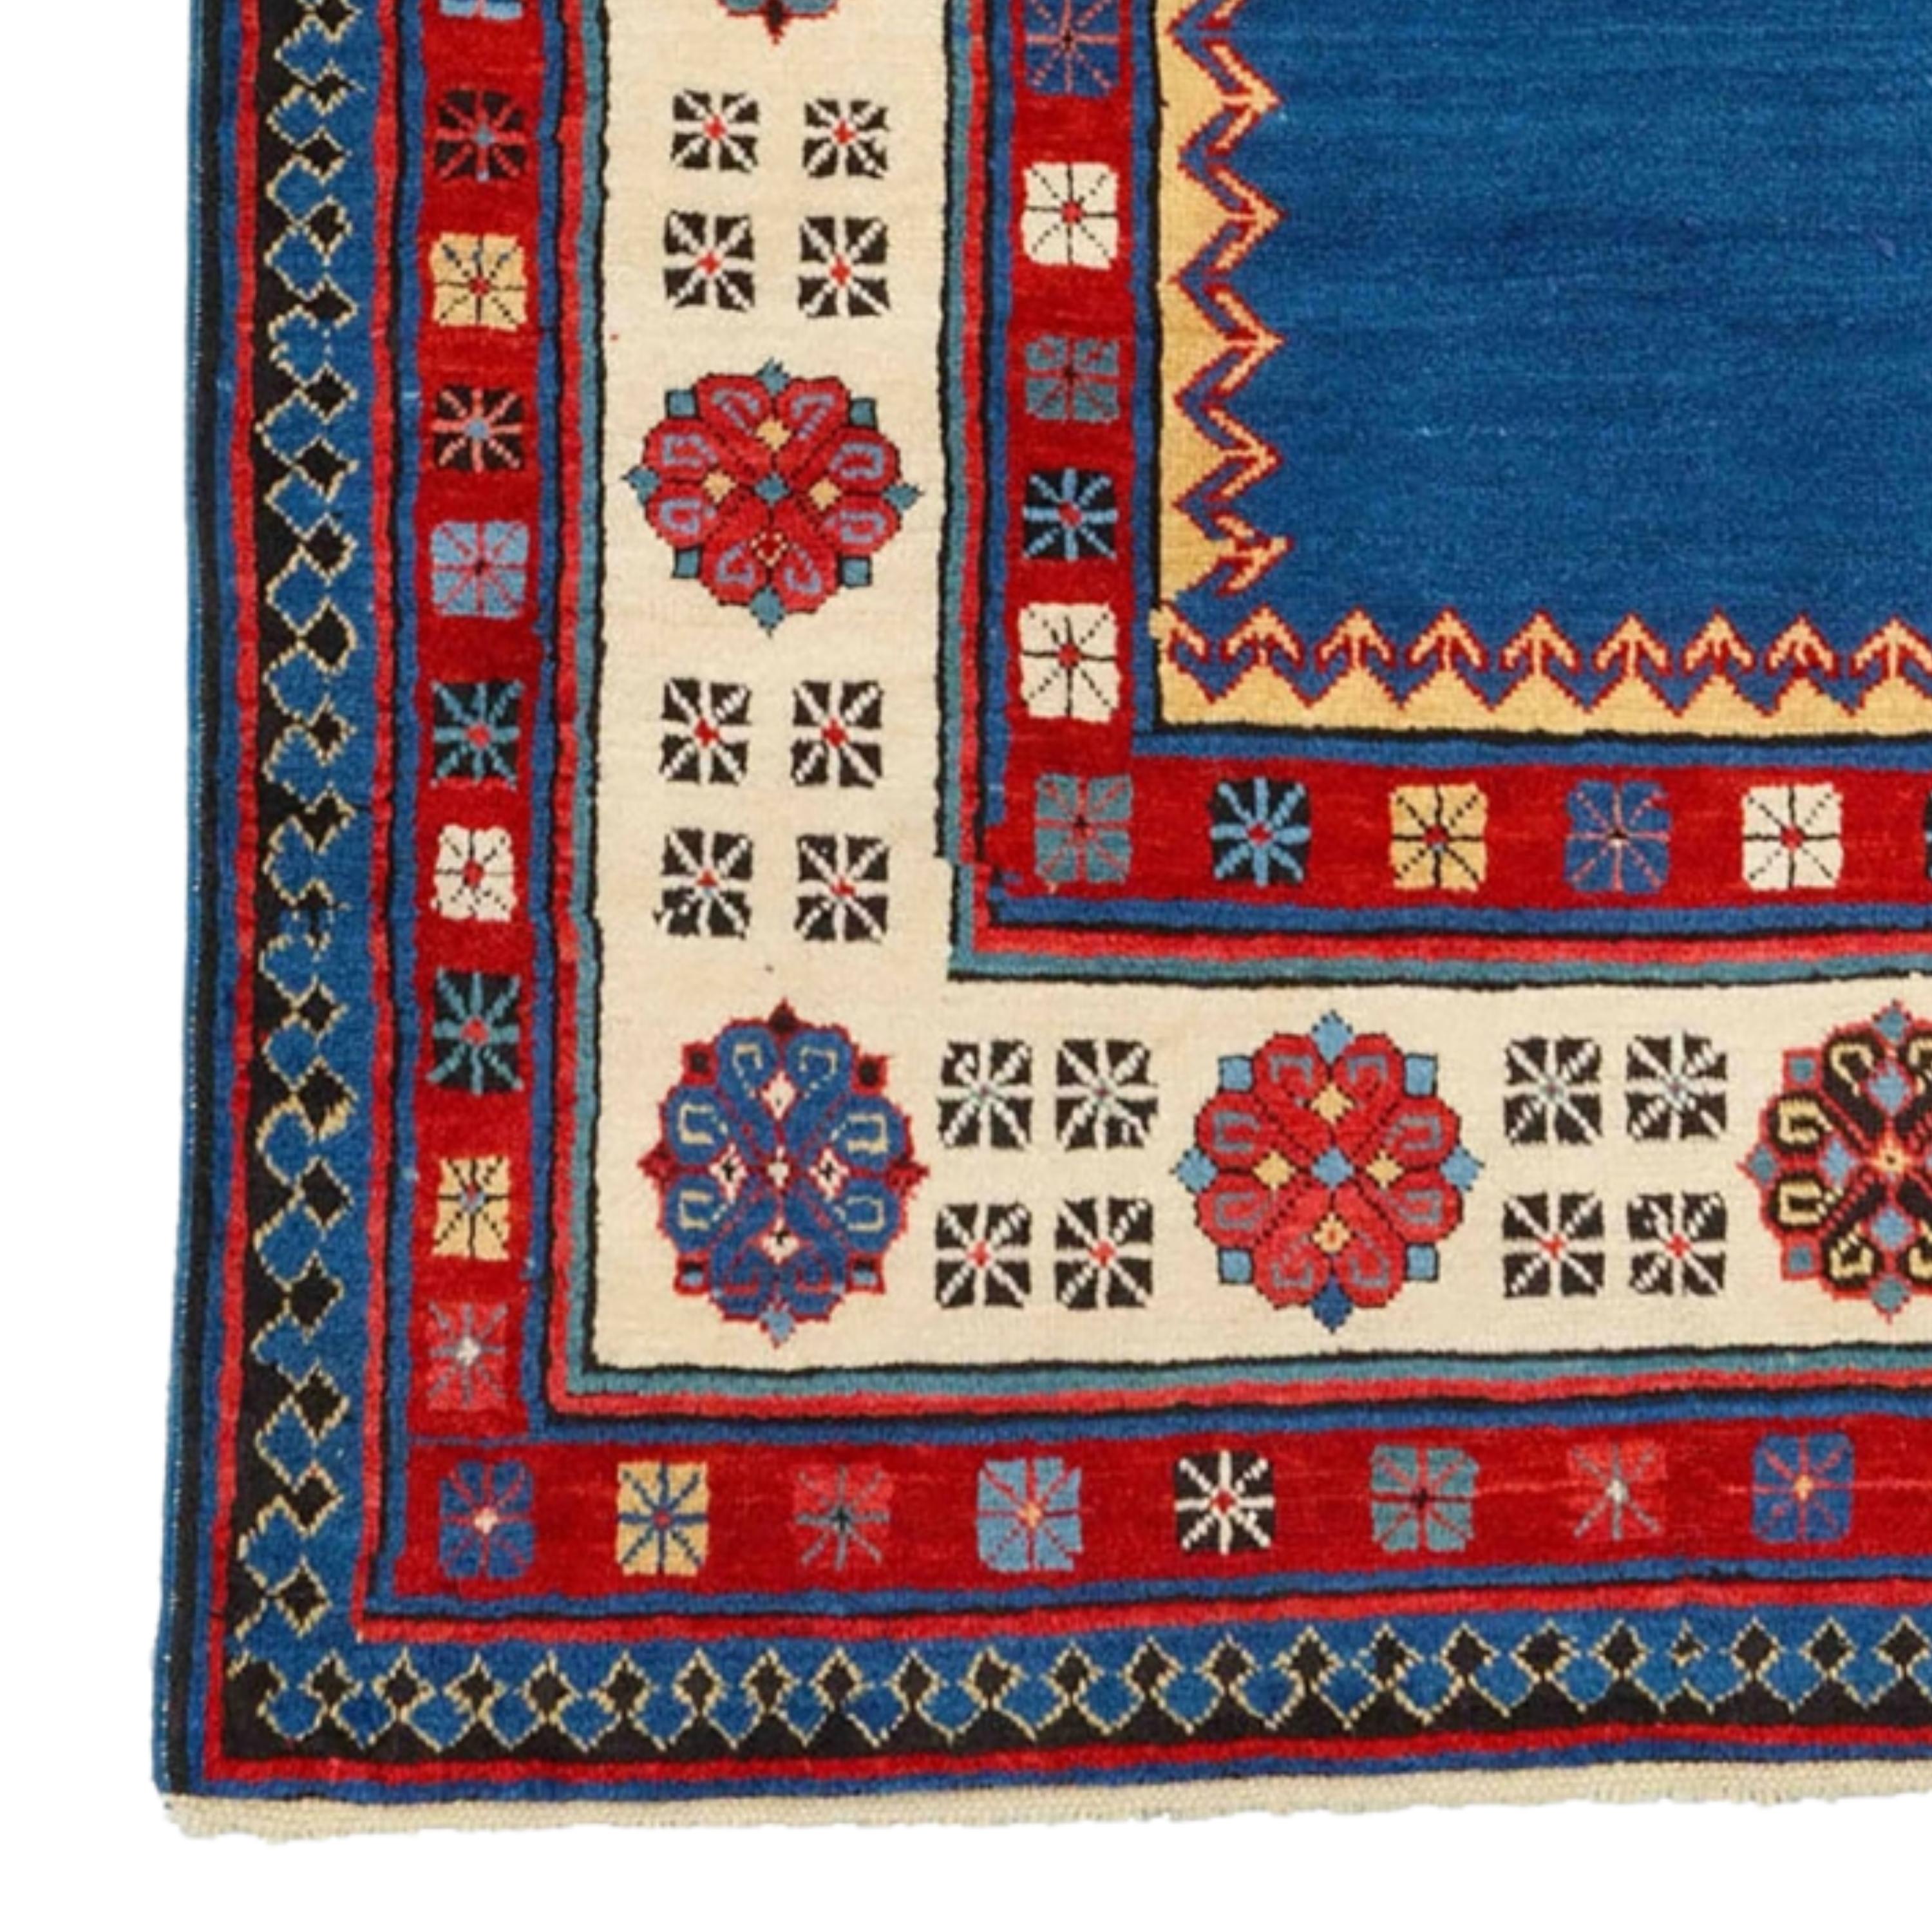 Caucasian Talish Rug  Caucasus Rug
South East Caucasus, Moghan region Talish Rug

Second half 19th Century South East Caucasus, Moghan region Talish Rug A rare Moghan woven in a long rug format. The blue met hane field is surrounded by green